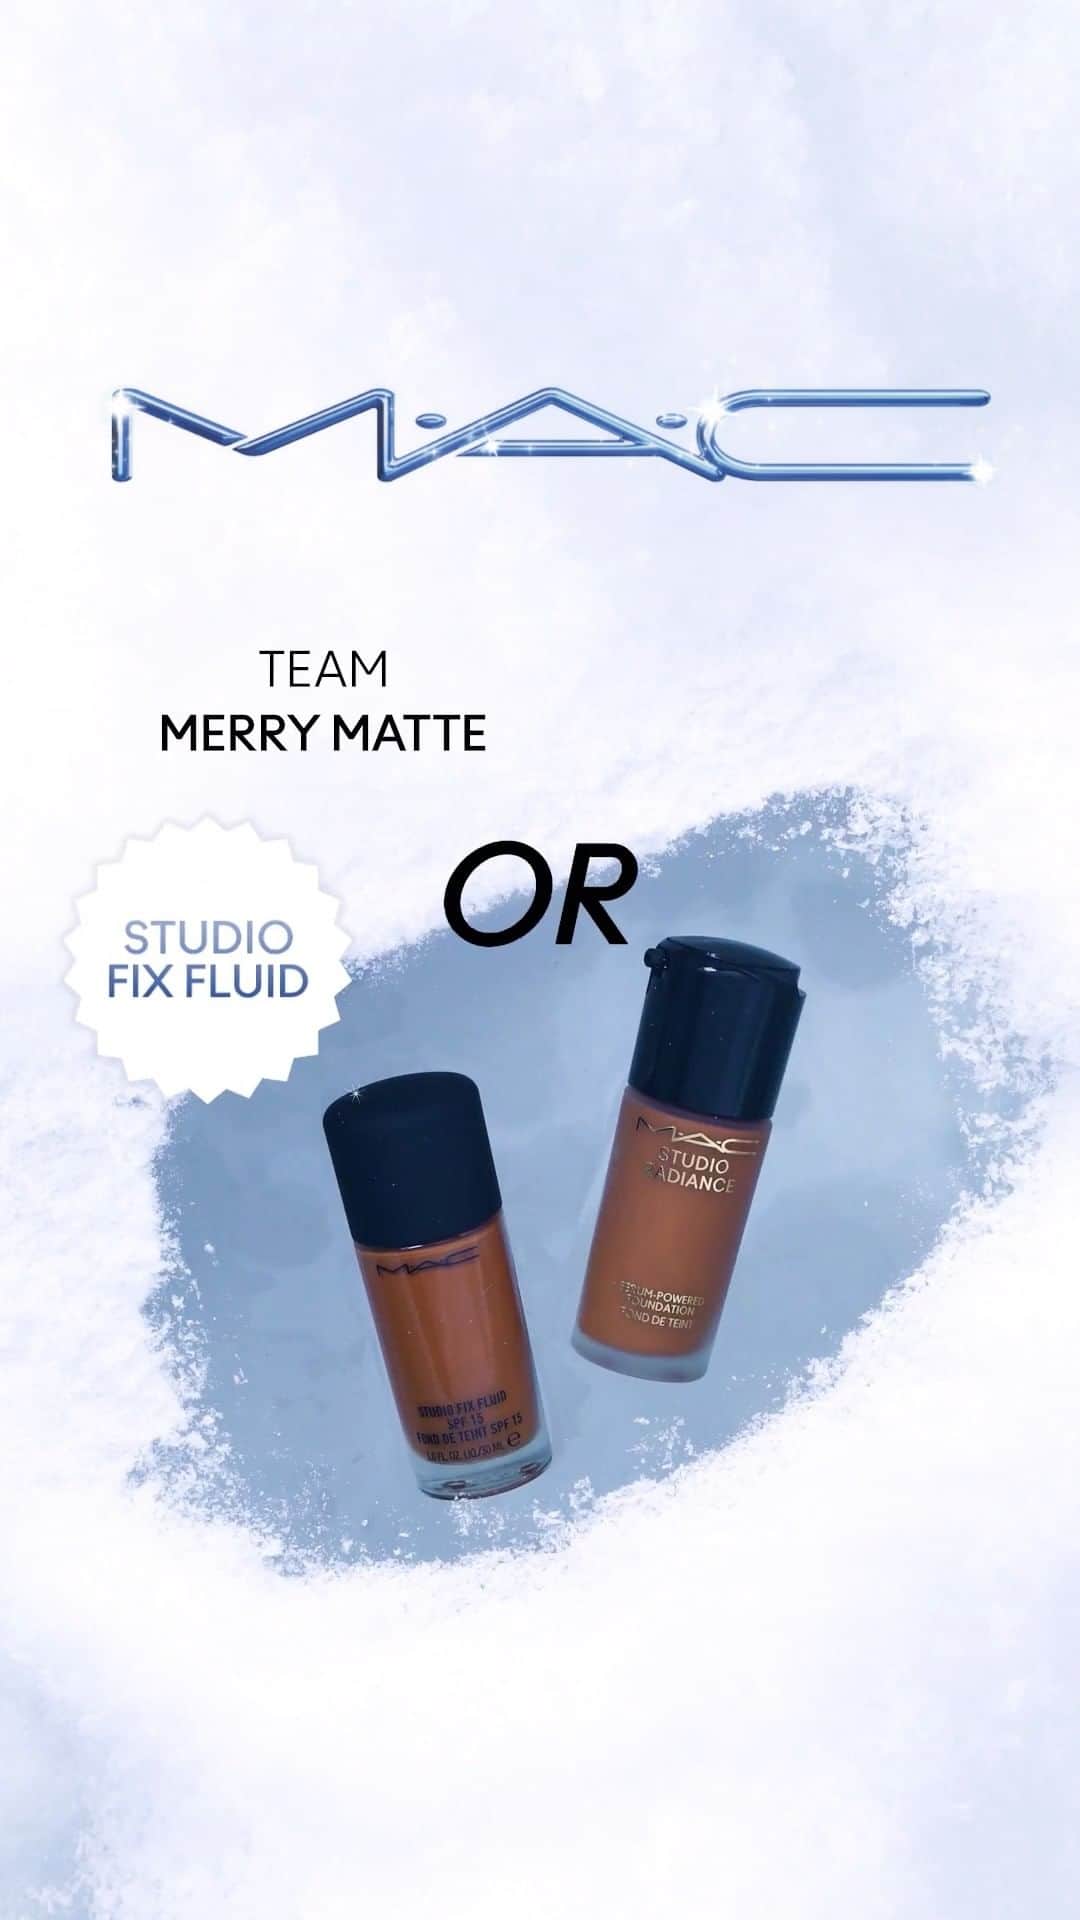 M·A·C Cosmetics UK & Irelandのインスタグラム：「Either way you’ll be looking flawless for the festive season 😍  Whether you love a velvet matte finish or want to turn up the glow we’ve got you covered!  Team Merry Matte:  ❄️ Studio Fix Fluid Team Holiday Glow: ✨ Studio Radiance Serum-Powered™ Foundation   Claim your free 10-day sample of foundation in-store today!  #MACCosmeticsUK #MACStudioFix #MACStudioRadiance」